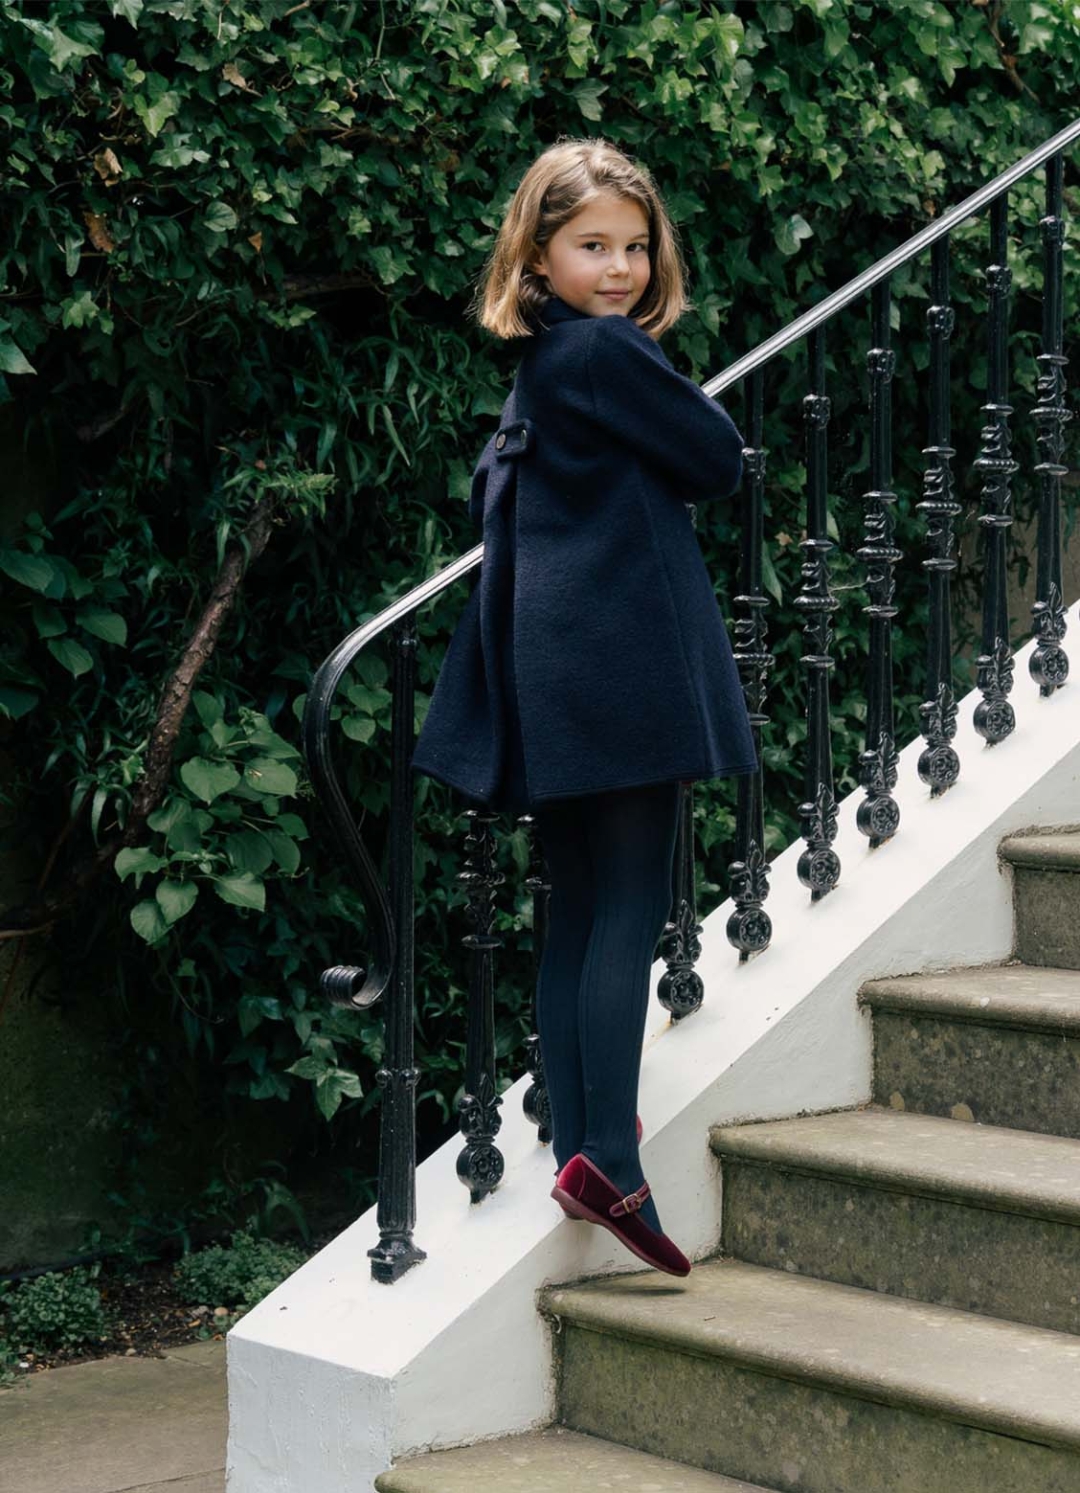 Amaia Kids children’s fashion is a hit in the United Kingdom, but also in the United States and Japan